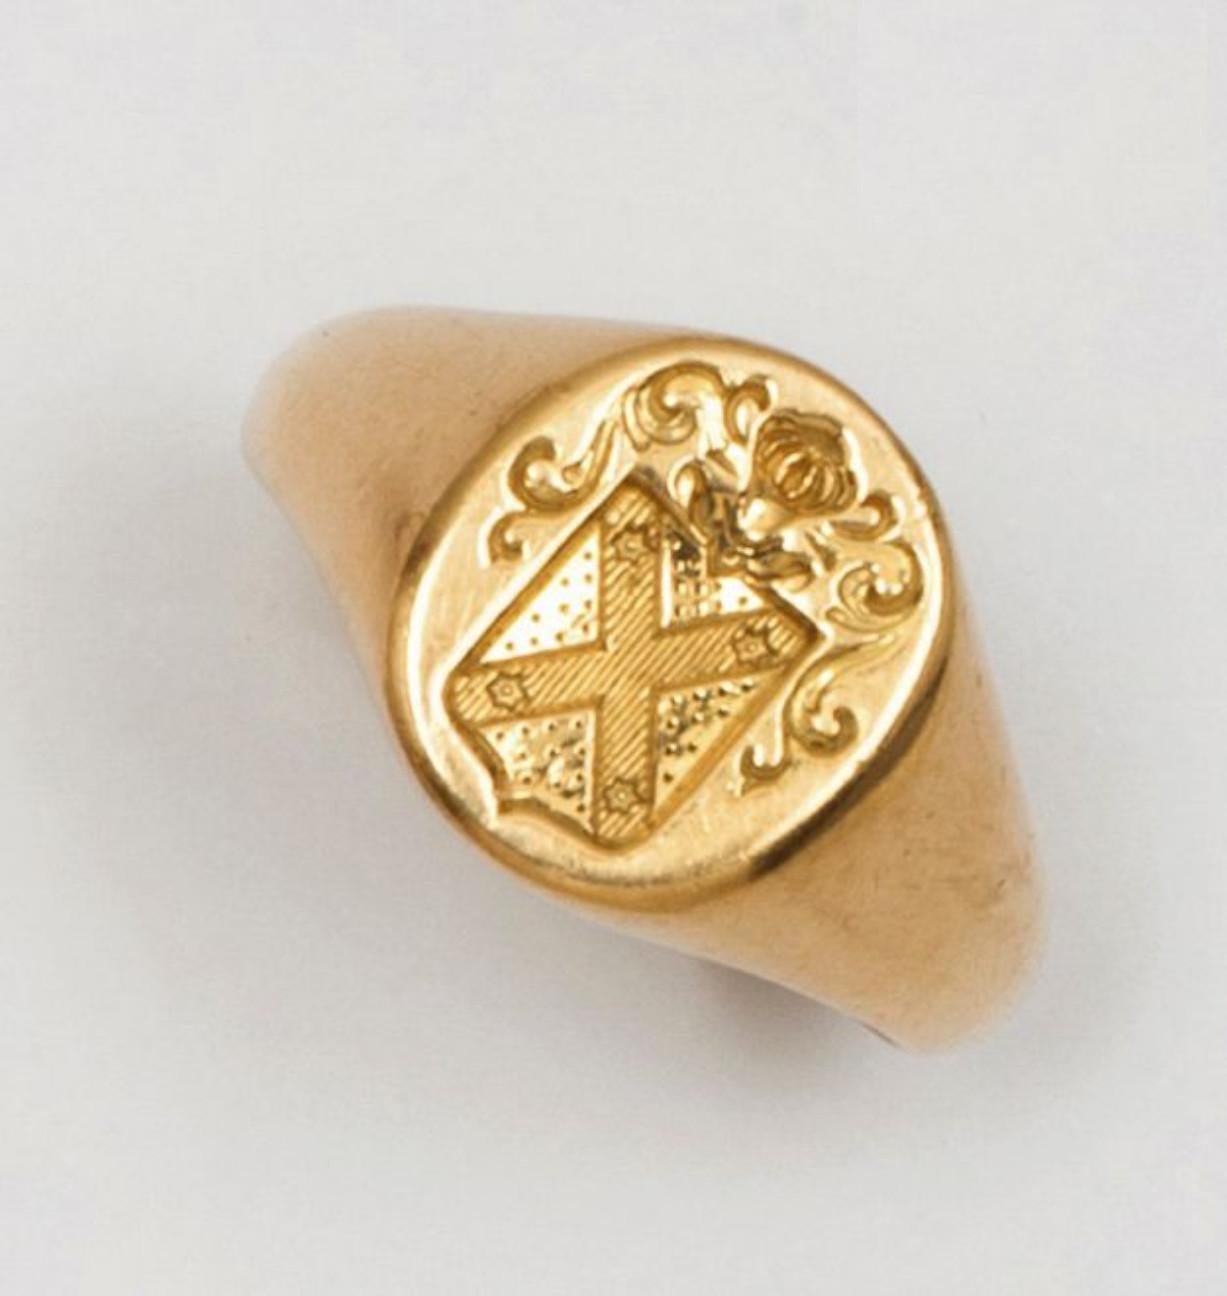 SHIPPING POLICY:
No additional costs will be added to this order.
Shipping costs will be totally covered by the seller (customs duties included). 

Signet ring in yellow gold, engraved with a coat of arms under a knight's helmet. 
Ring size: 10